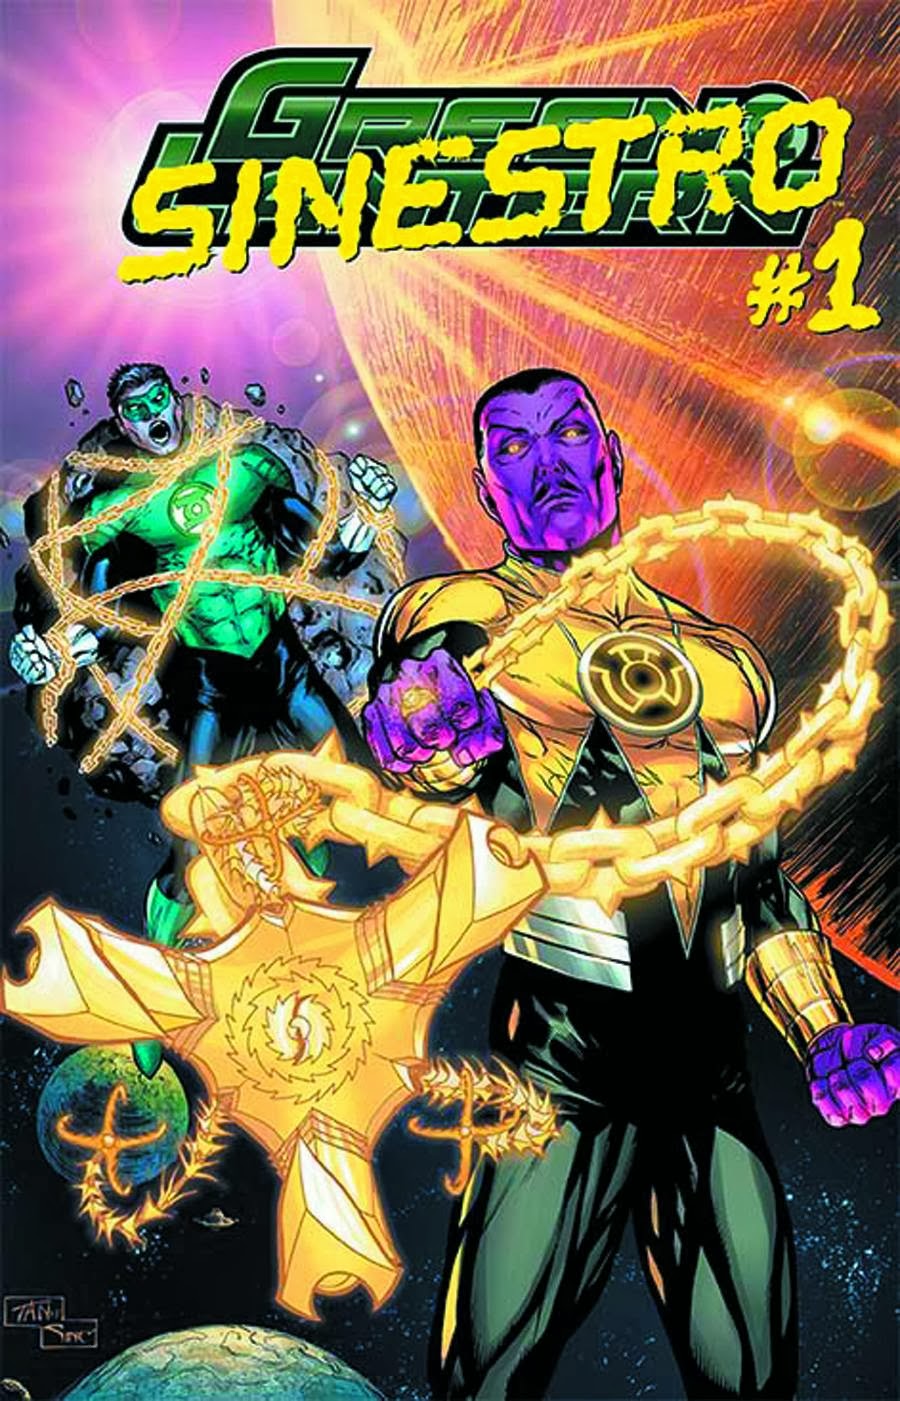 Sinestro's origin takes the stage in the final Green Lantern Villains Month comic.